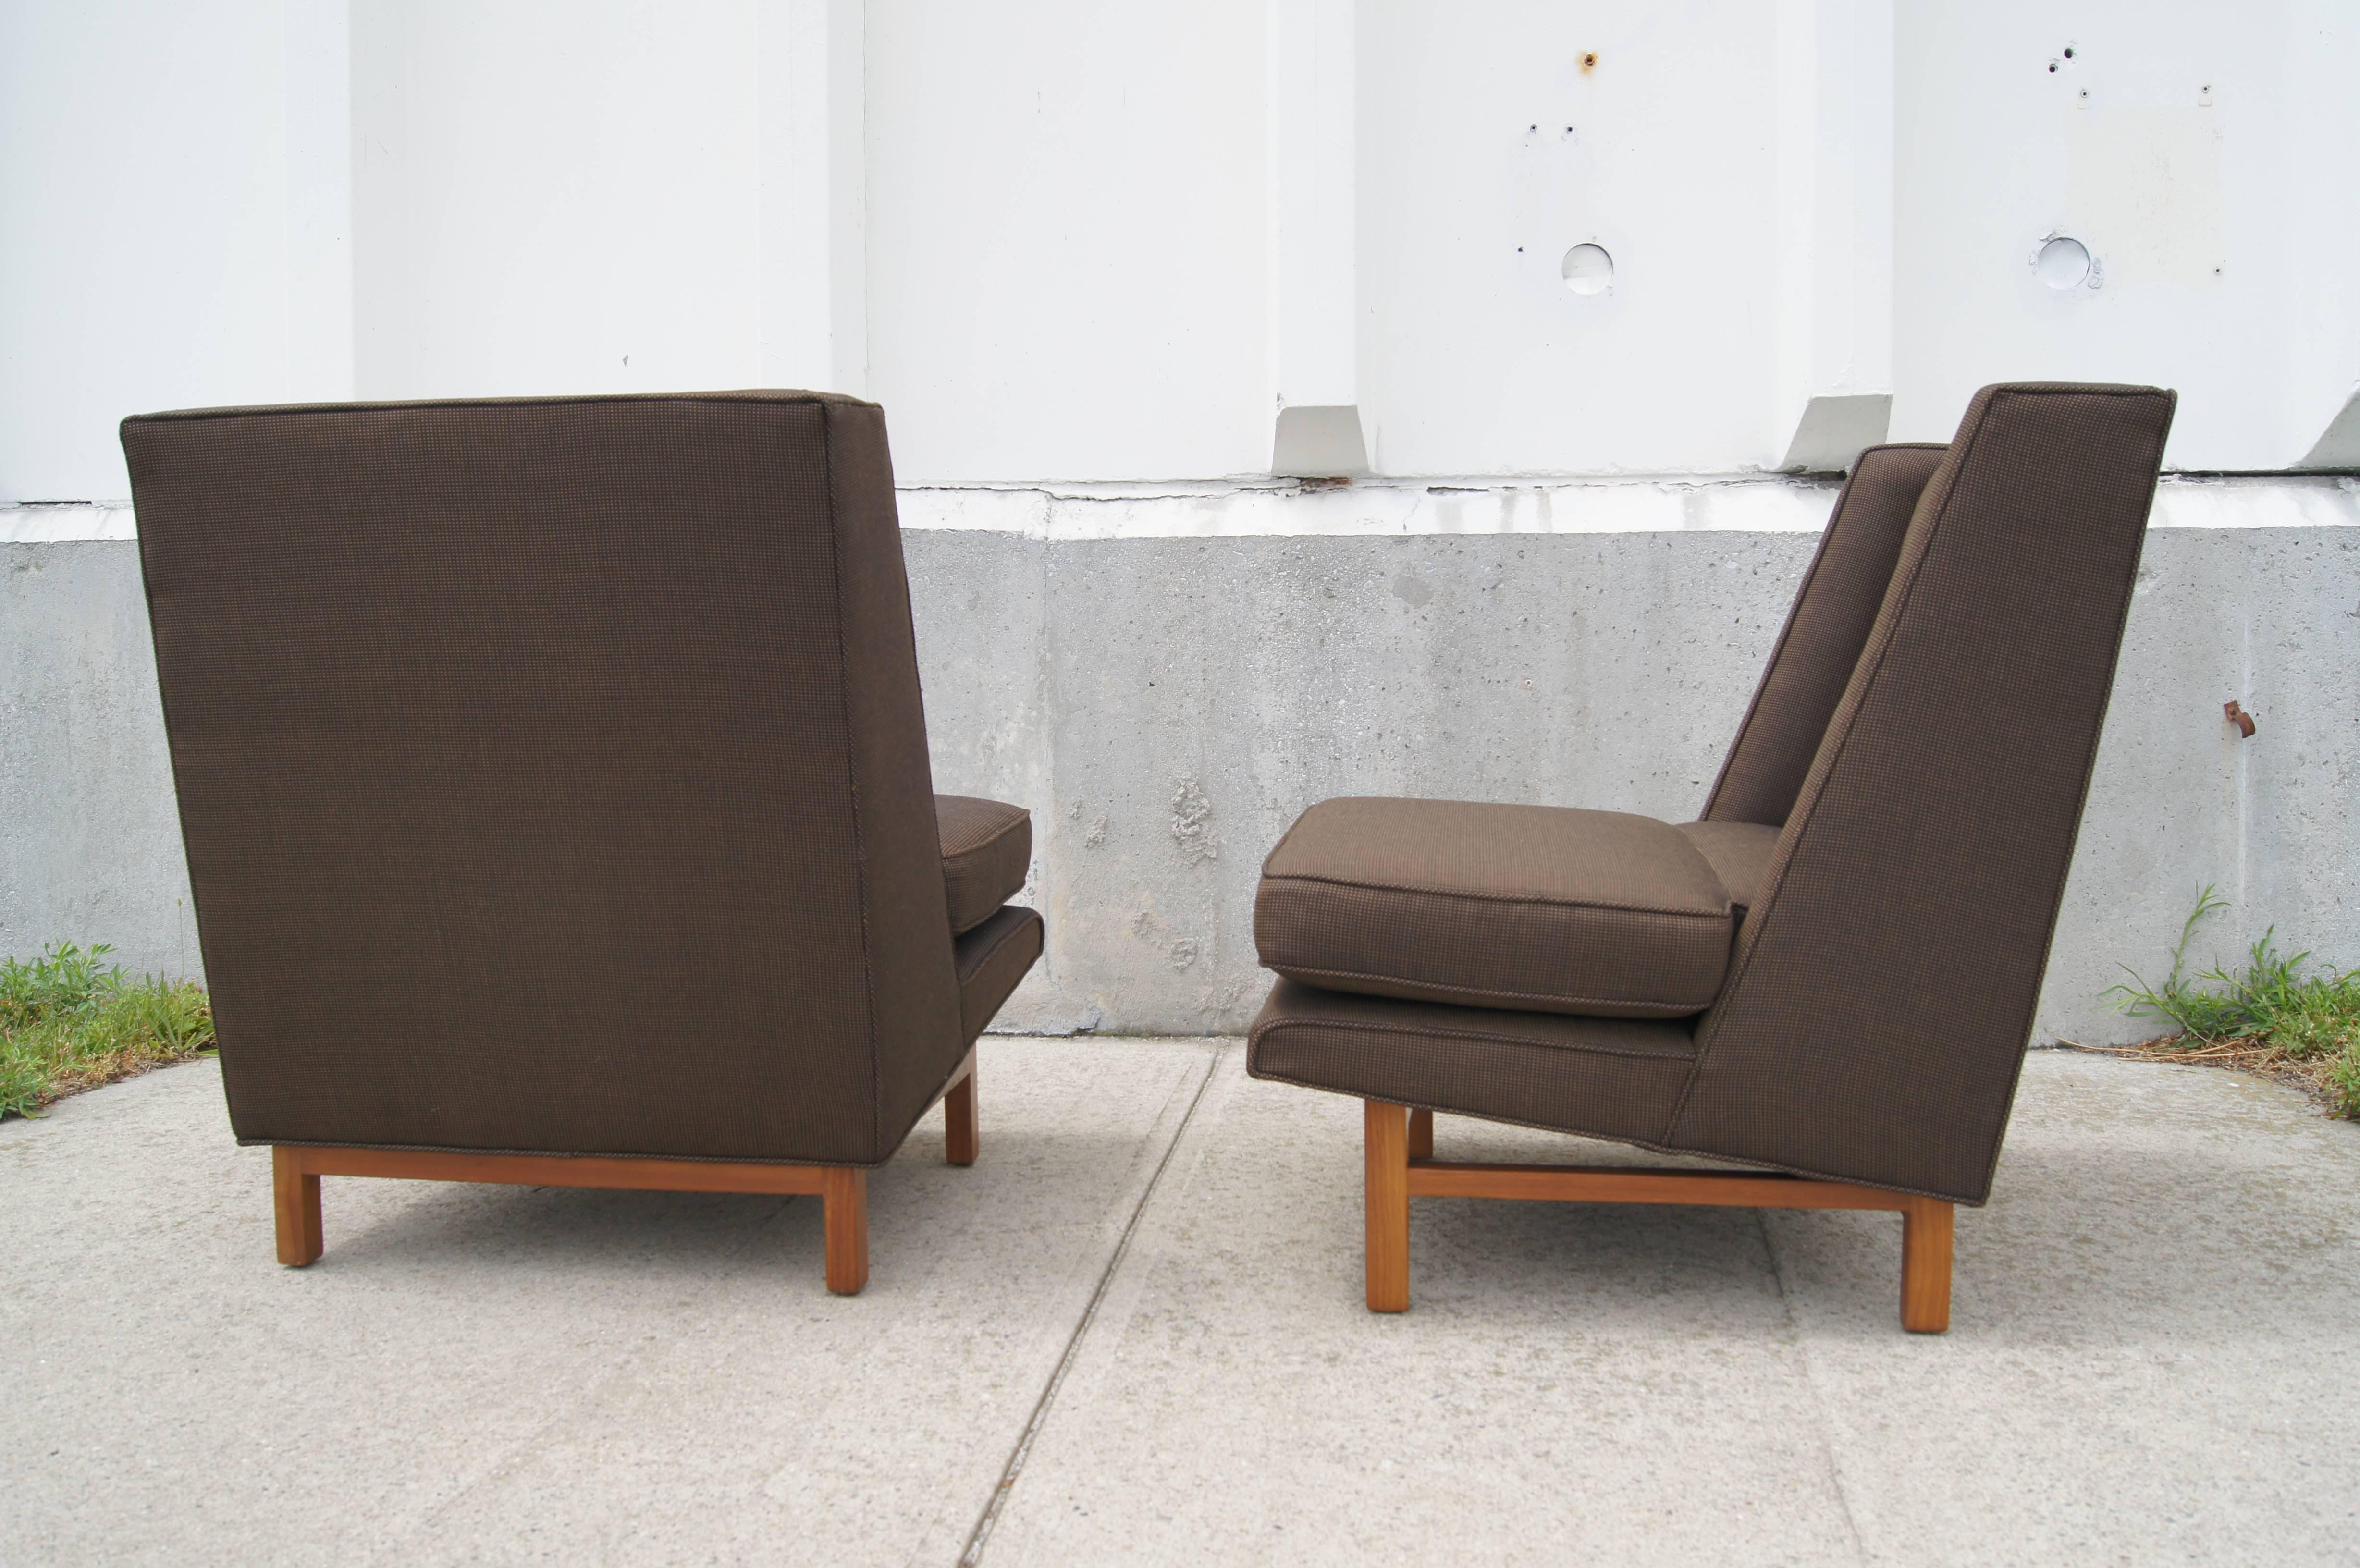 Edward Wormley designed these clean-lined wing chairs, model # 5938, for Dunbar's New Career Collection. A sloping back rises from low, wide seats that angle up from the mahogany base.  

These rare chairs have been newly reupholstered in Knoll's